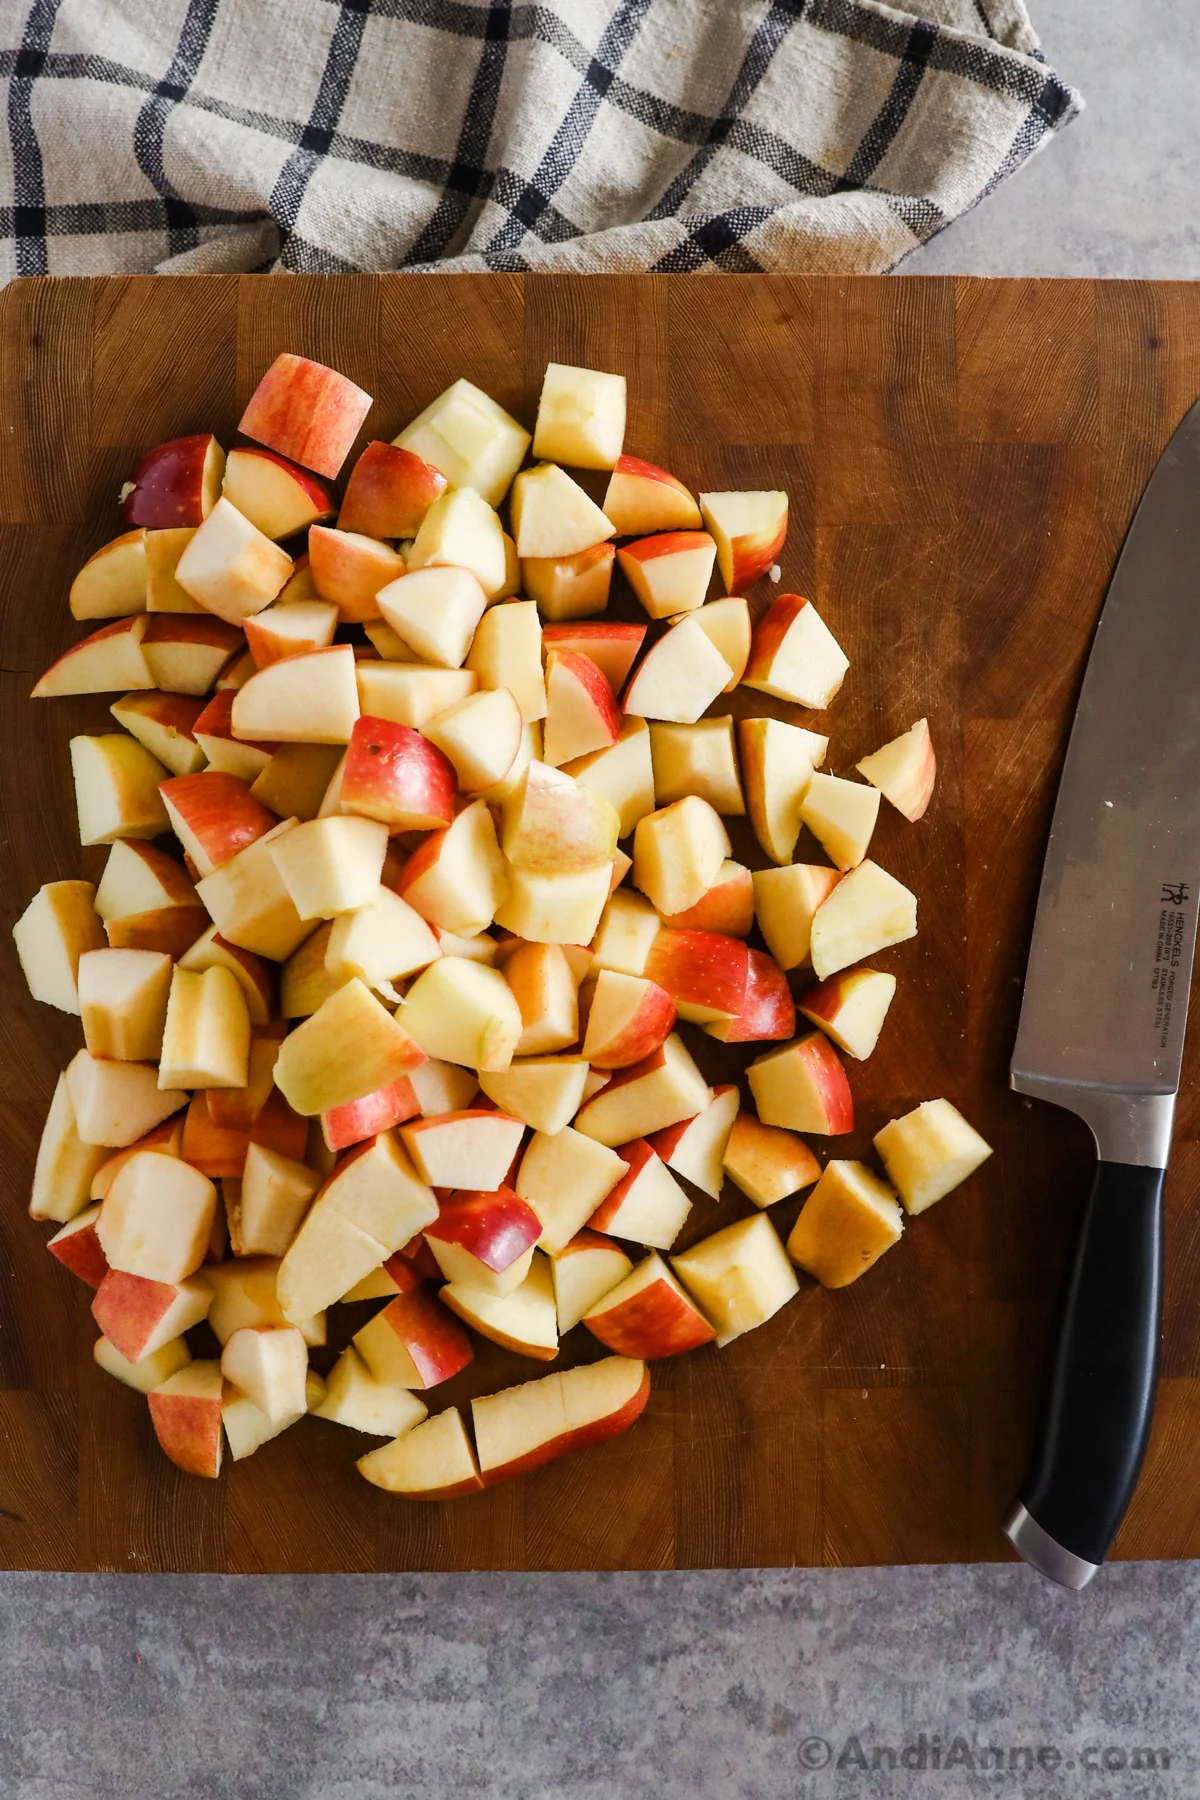 Chopped apples on a cutting board with a knife.